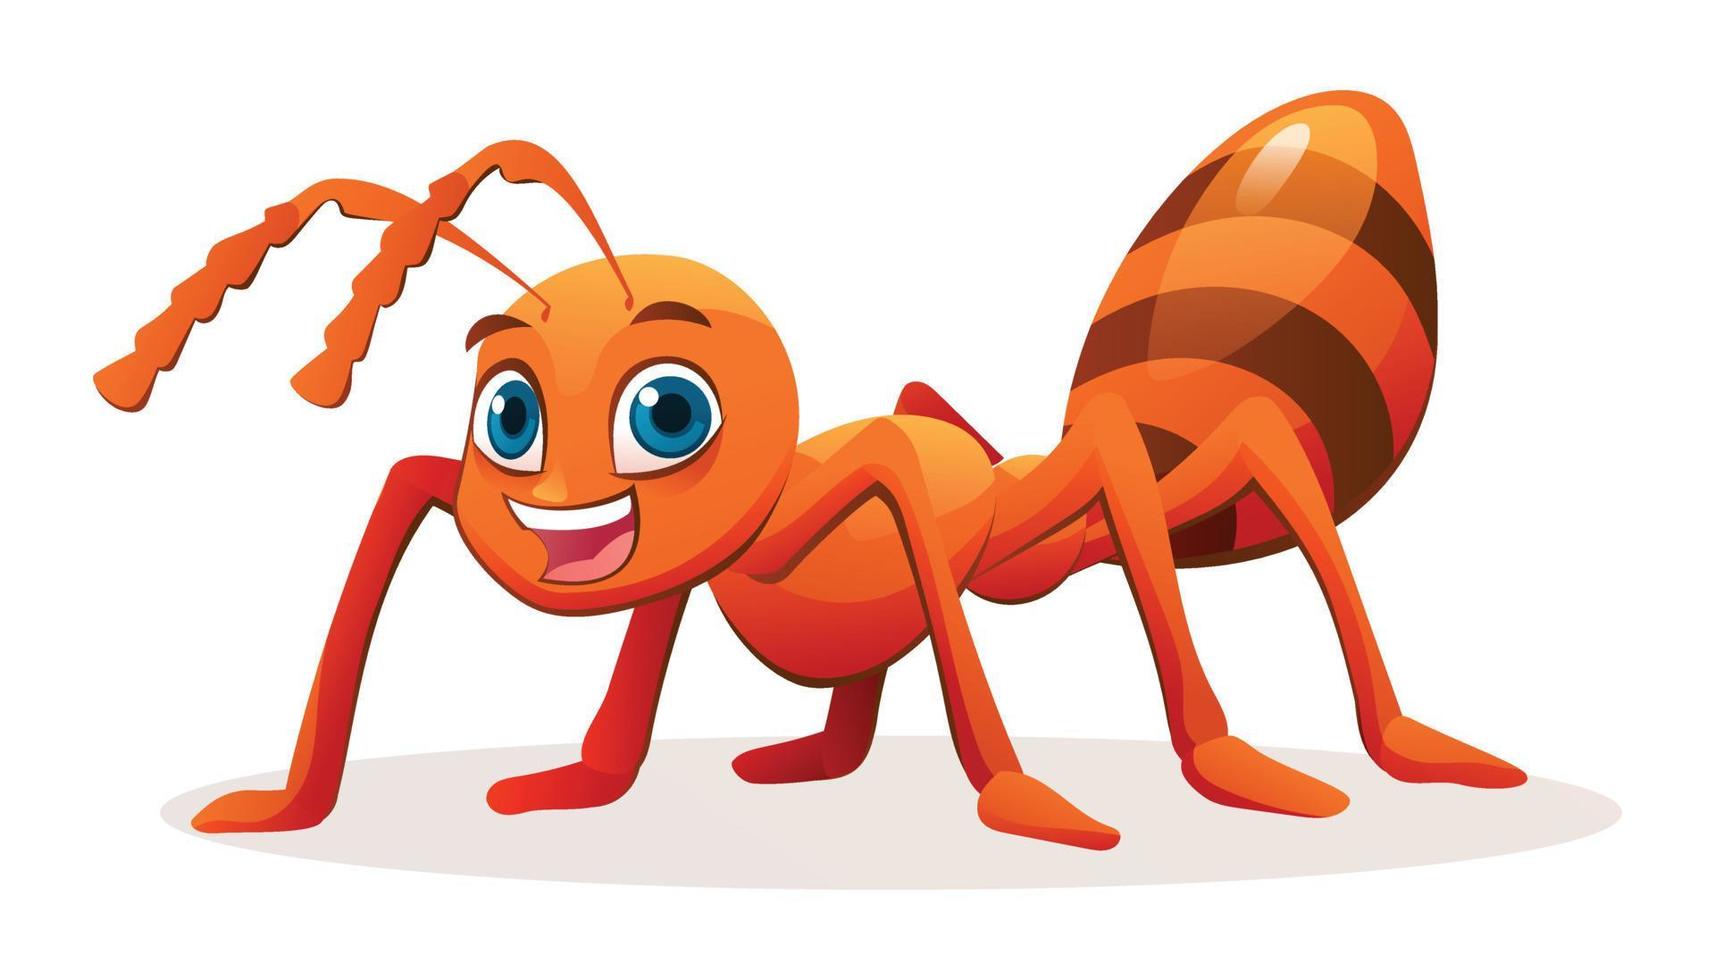 Cute ant cartoon illustration isolated on white background vector